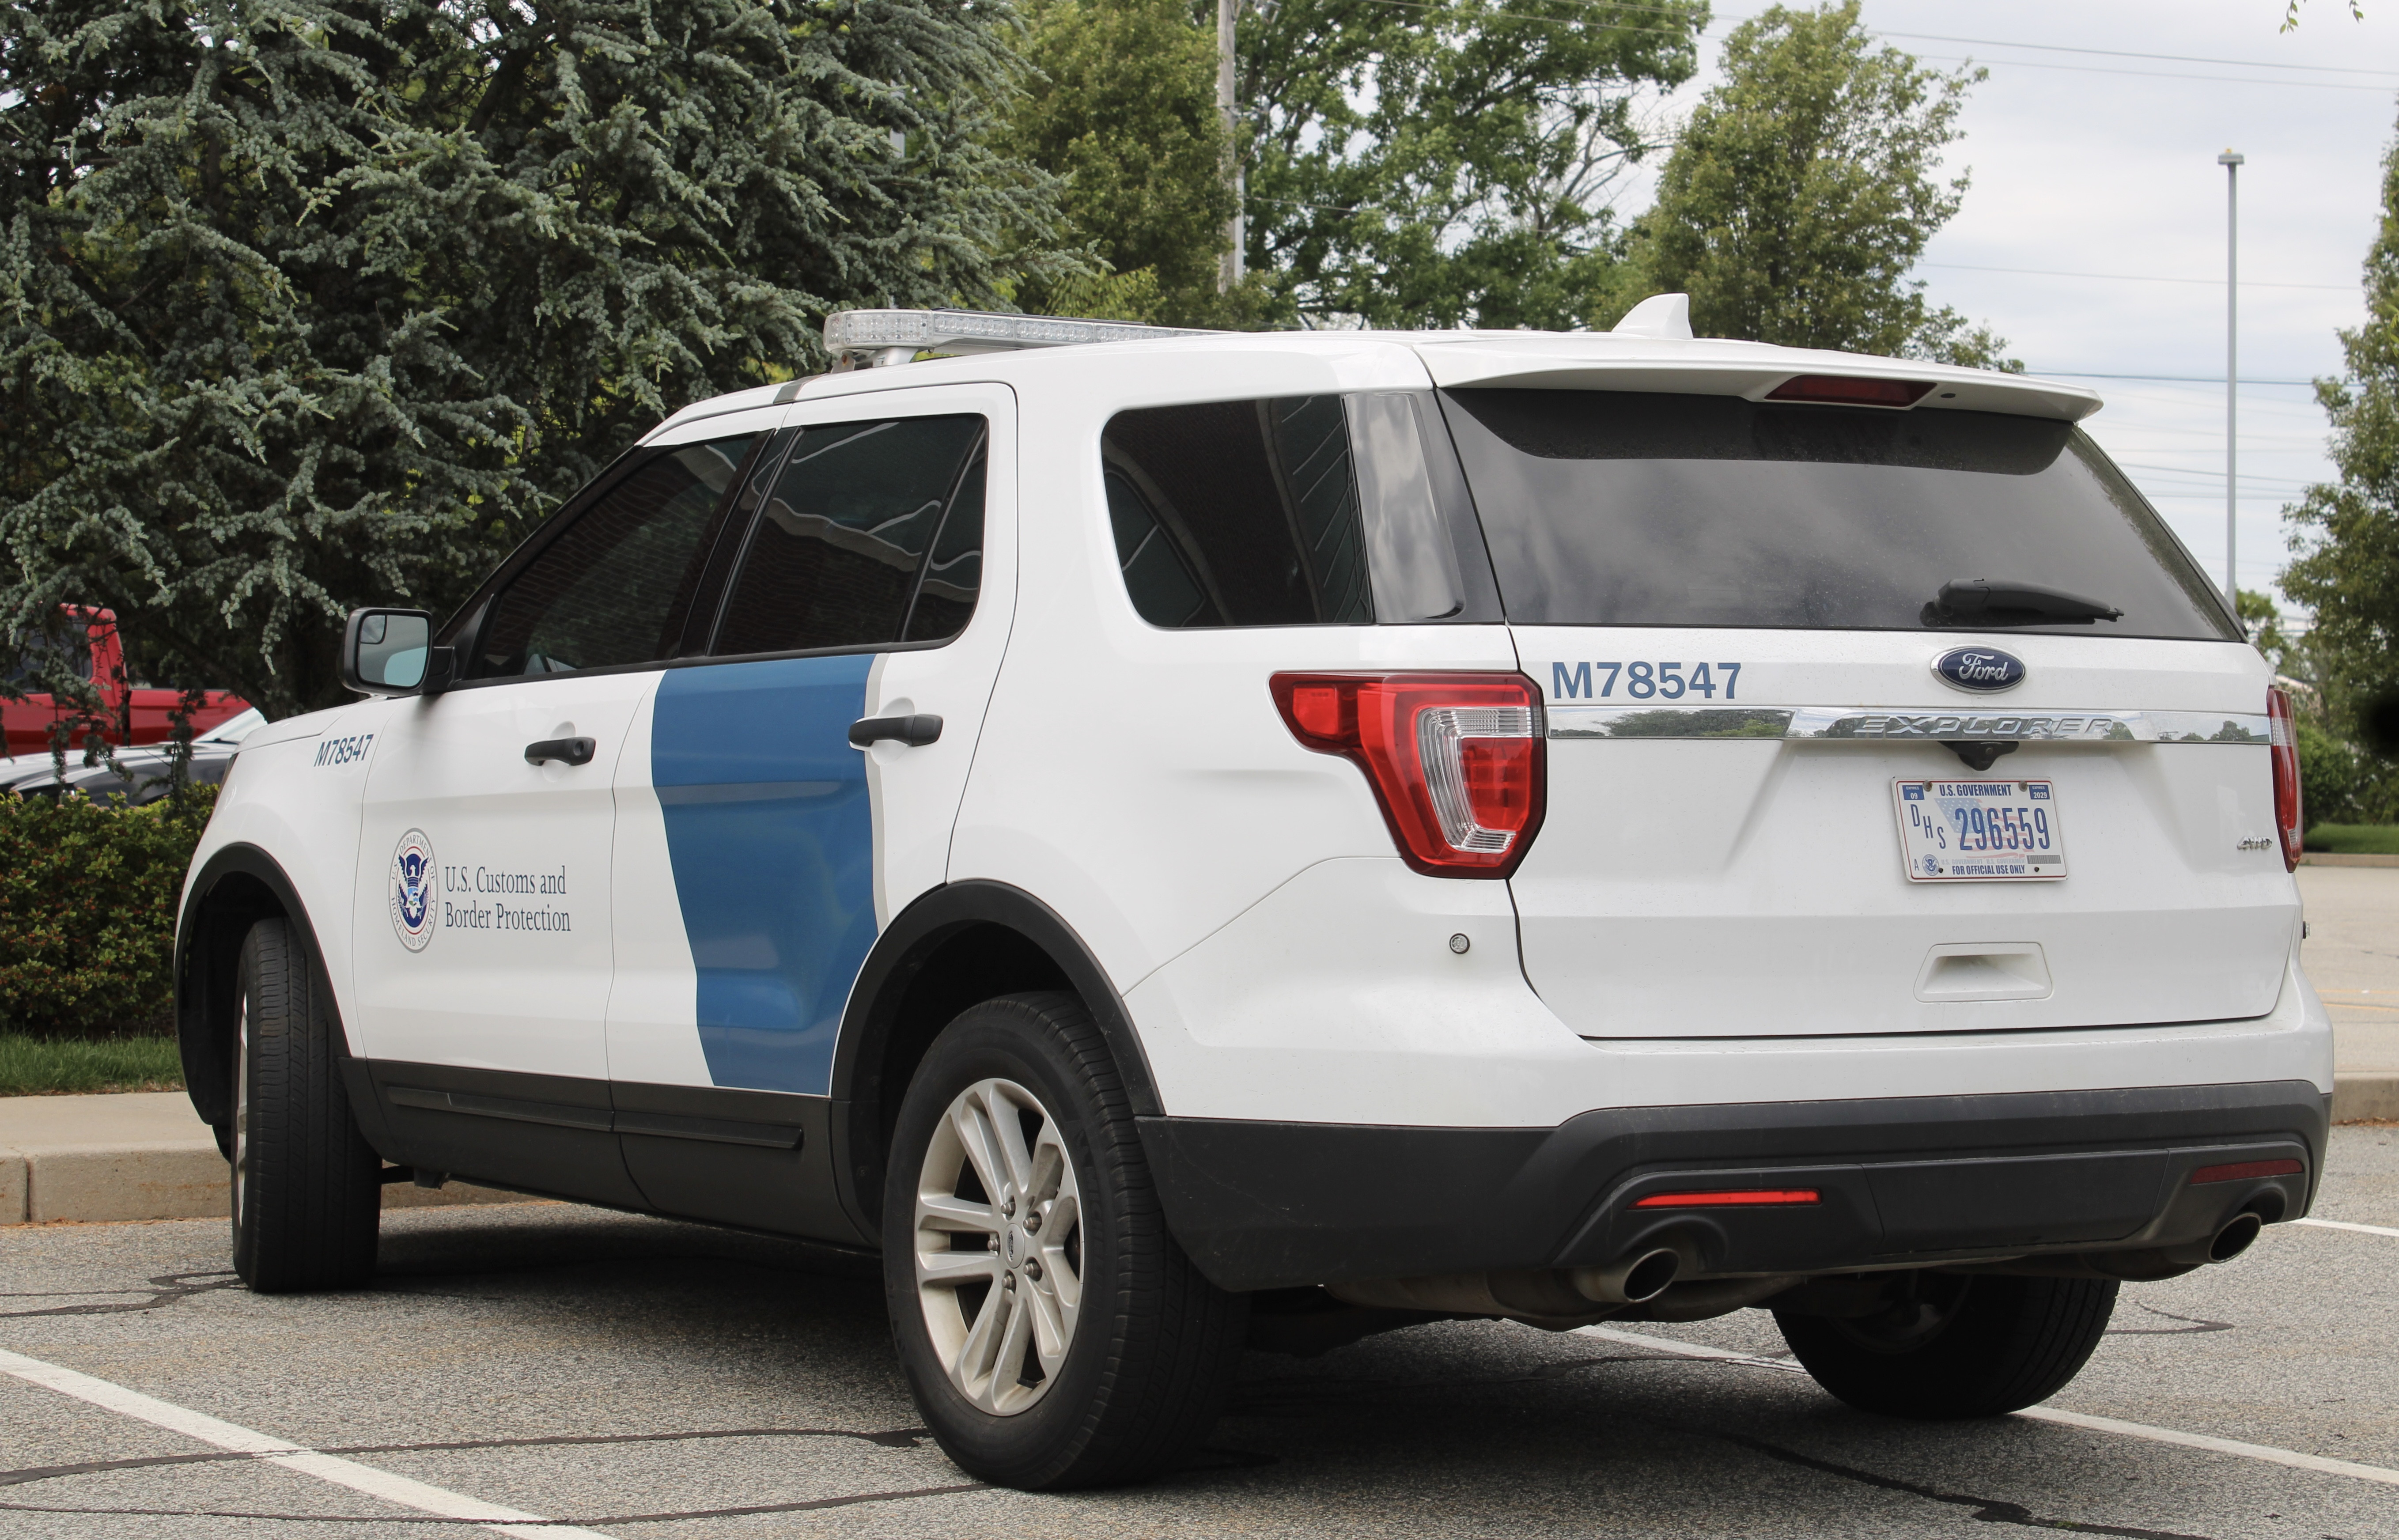 A photo  of US Customs and Border Protection
            Cruiser M78547, a 2018-2019 Ford Explorer             taken by @riemergencyvehicles